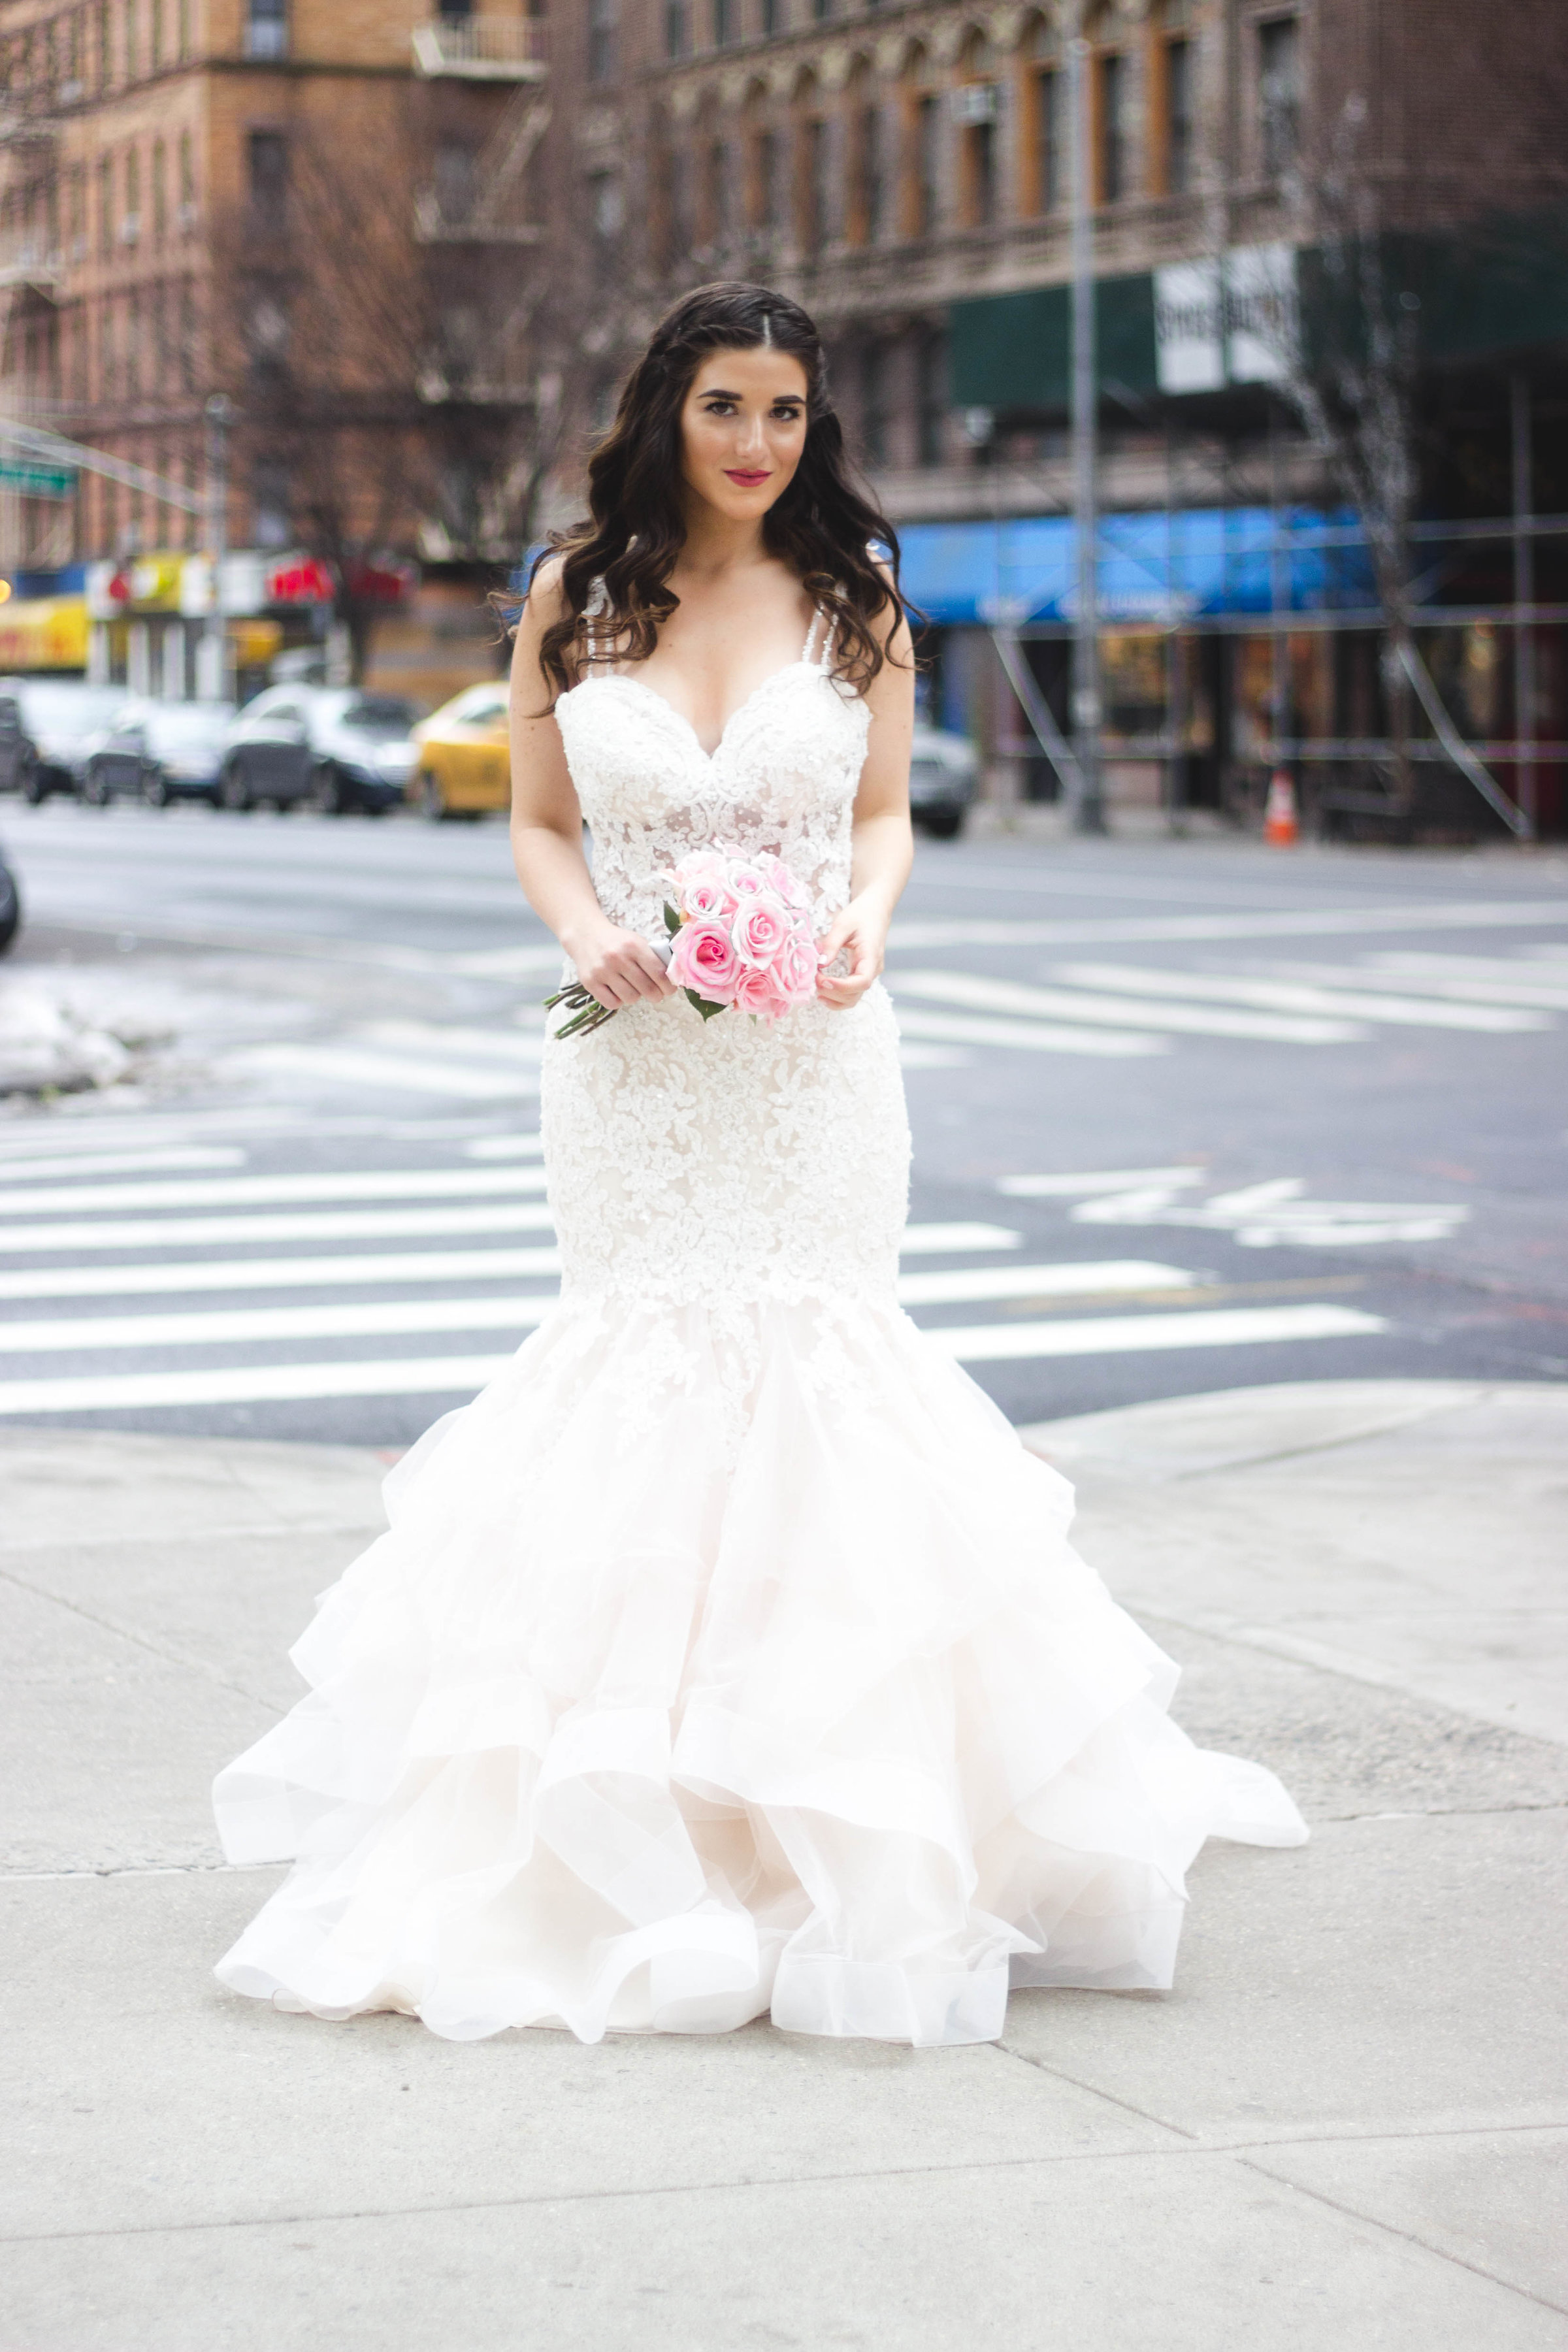 Playing Dress Up With Morilee Bridal Esther Santer Fashion Blog NYC Street Style Blogger Outfit OOTD Trendy Wedding Dress Gown White Dreamy Modern Timeless Beautiful Train Pink Flowers Bouquet Hair Hairstyle Beauty  Makeup Lace Mermaid Trumpet Flare.jpg